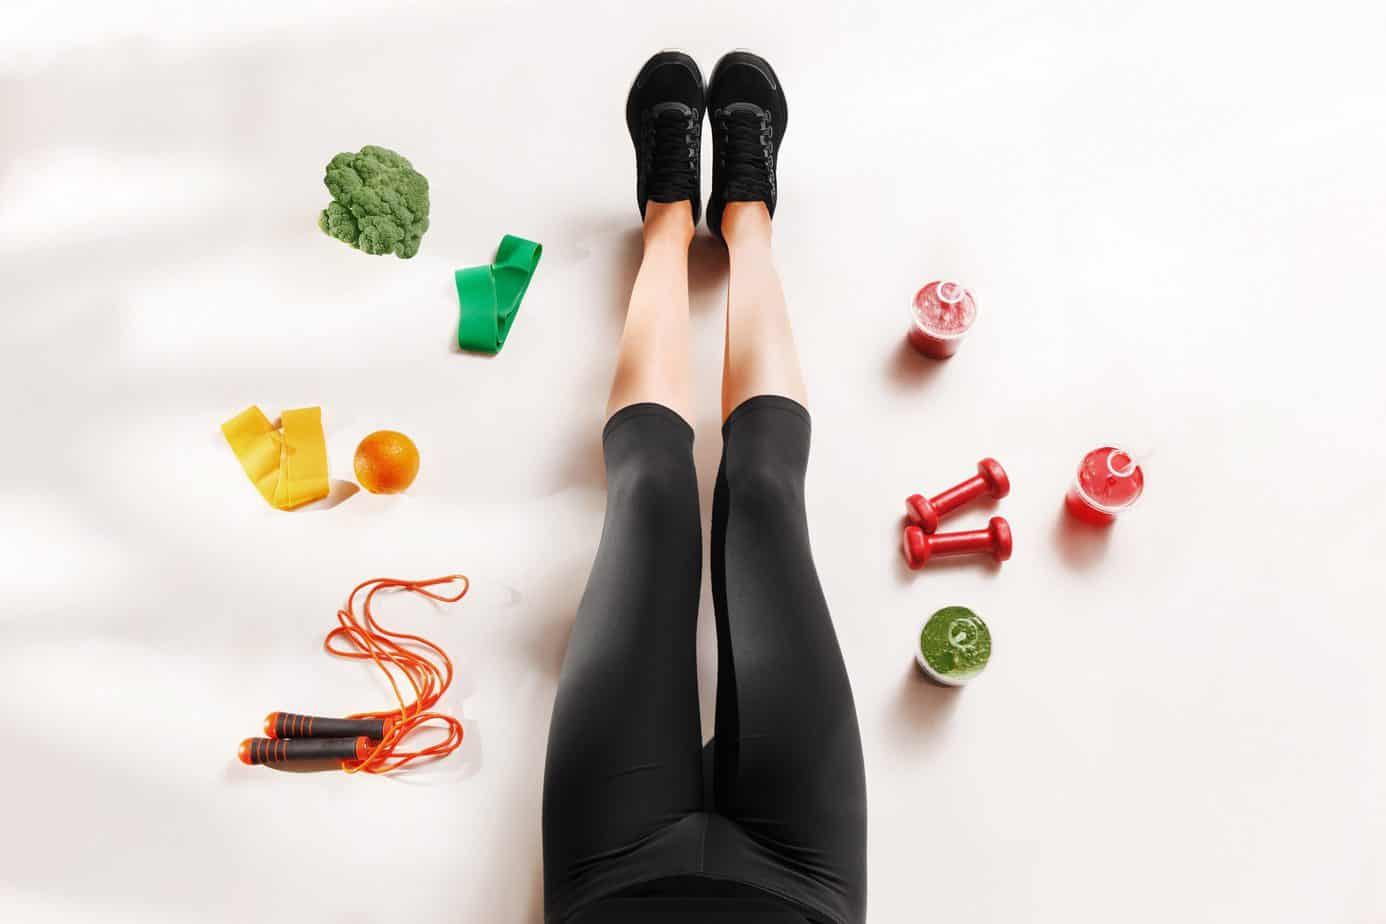 How do you match diet to physical activity?